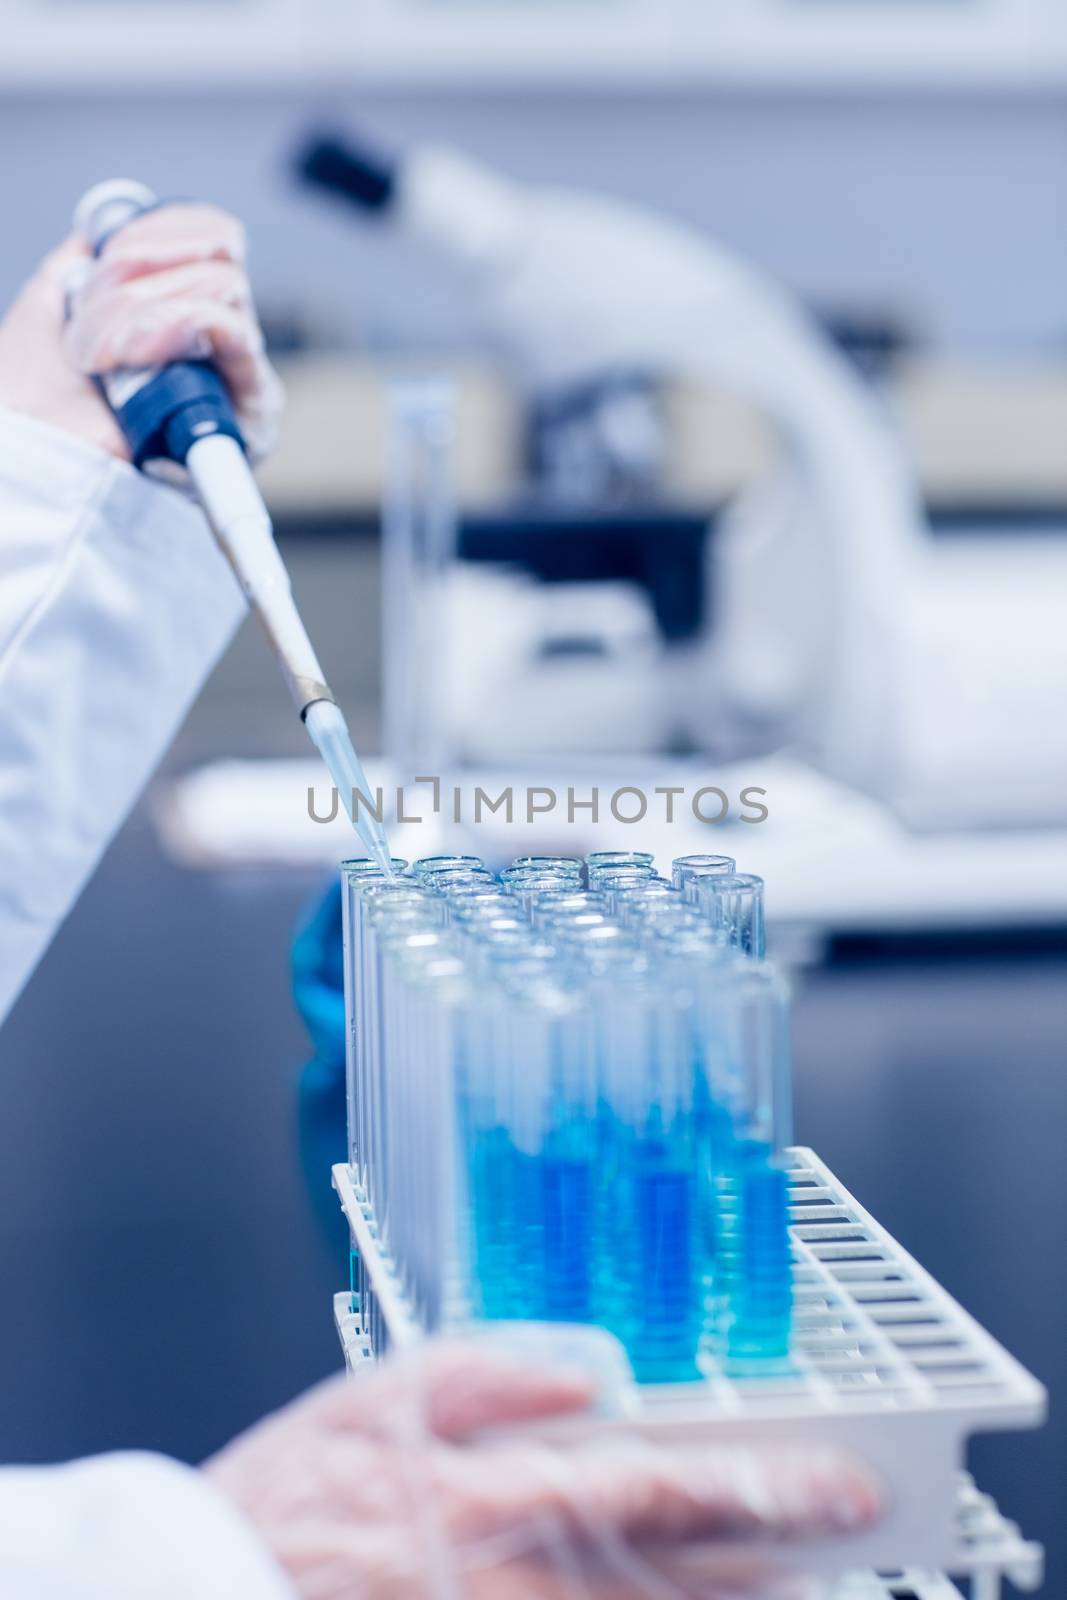 Science student using pipette in the lab to fill test tubes at the university